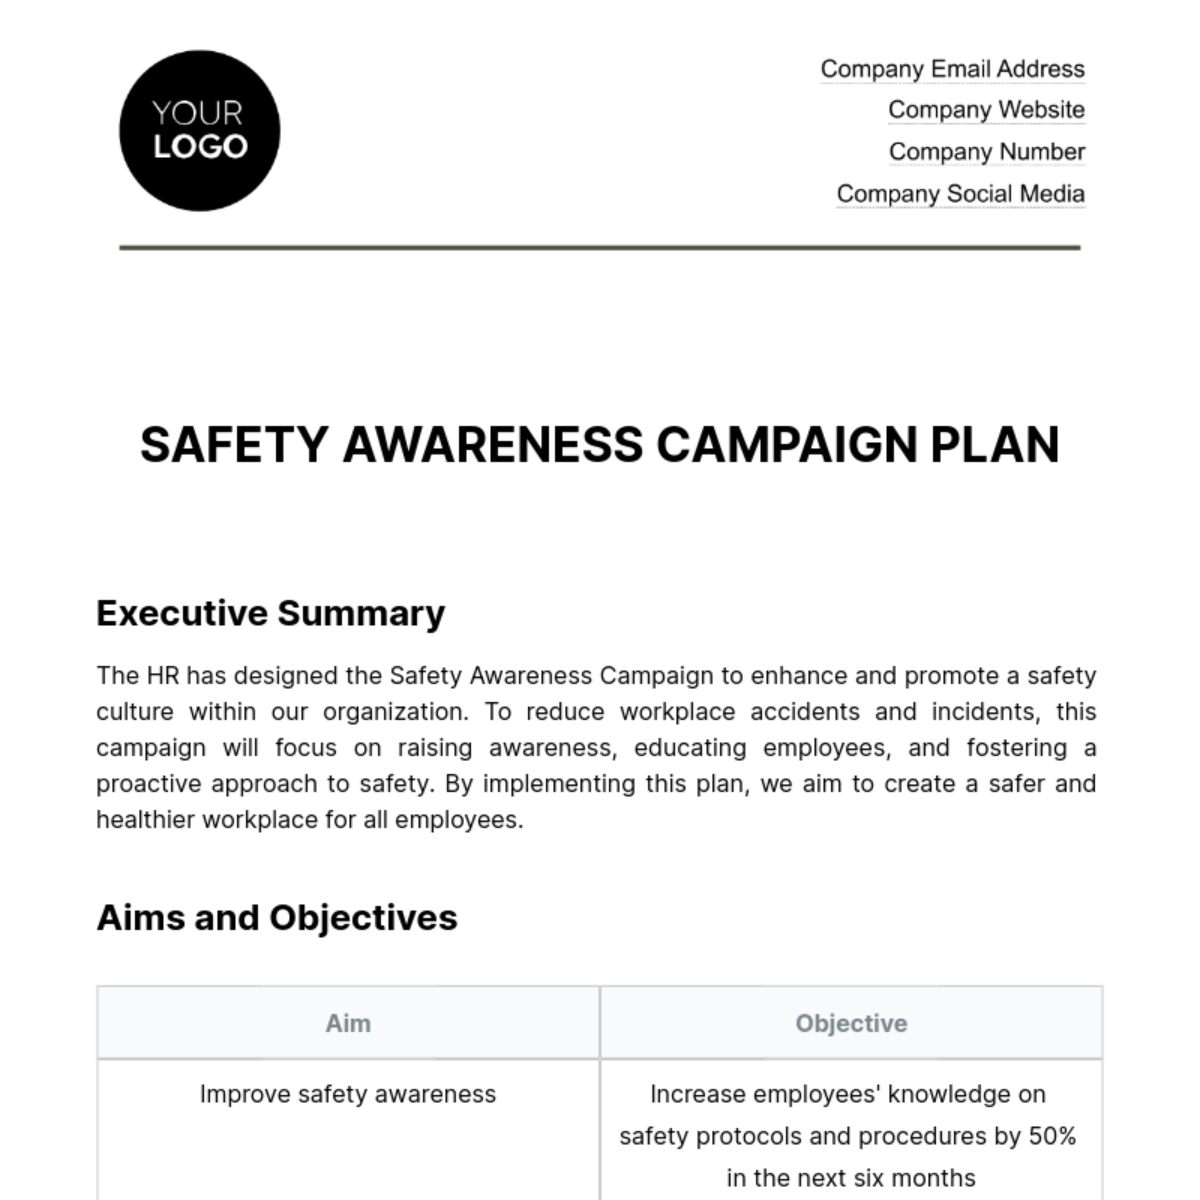 Free Safety Awareness Campaign Plan HR Template